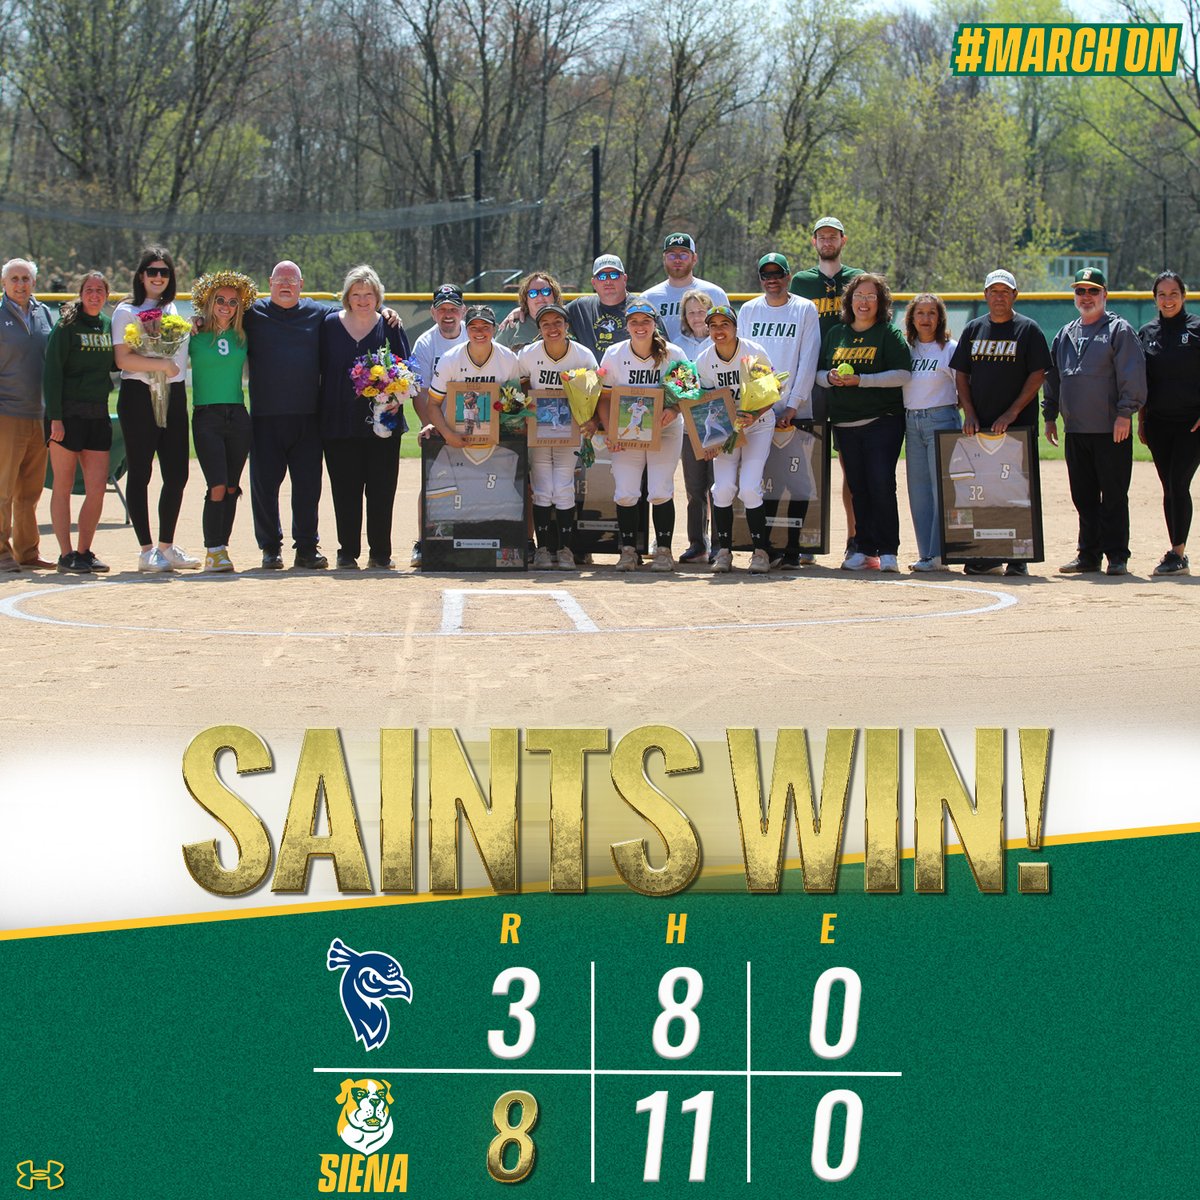 Ended it at home the right way 😊 The Saints complete a weekend sweep of Saint Peter's at Siena Softball Field on Senior Day! #MarchOn x #SienaSaints x #NCAASoftball x #MAACSoftball